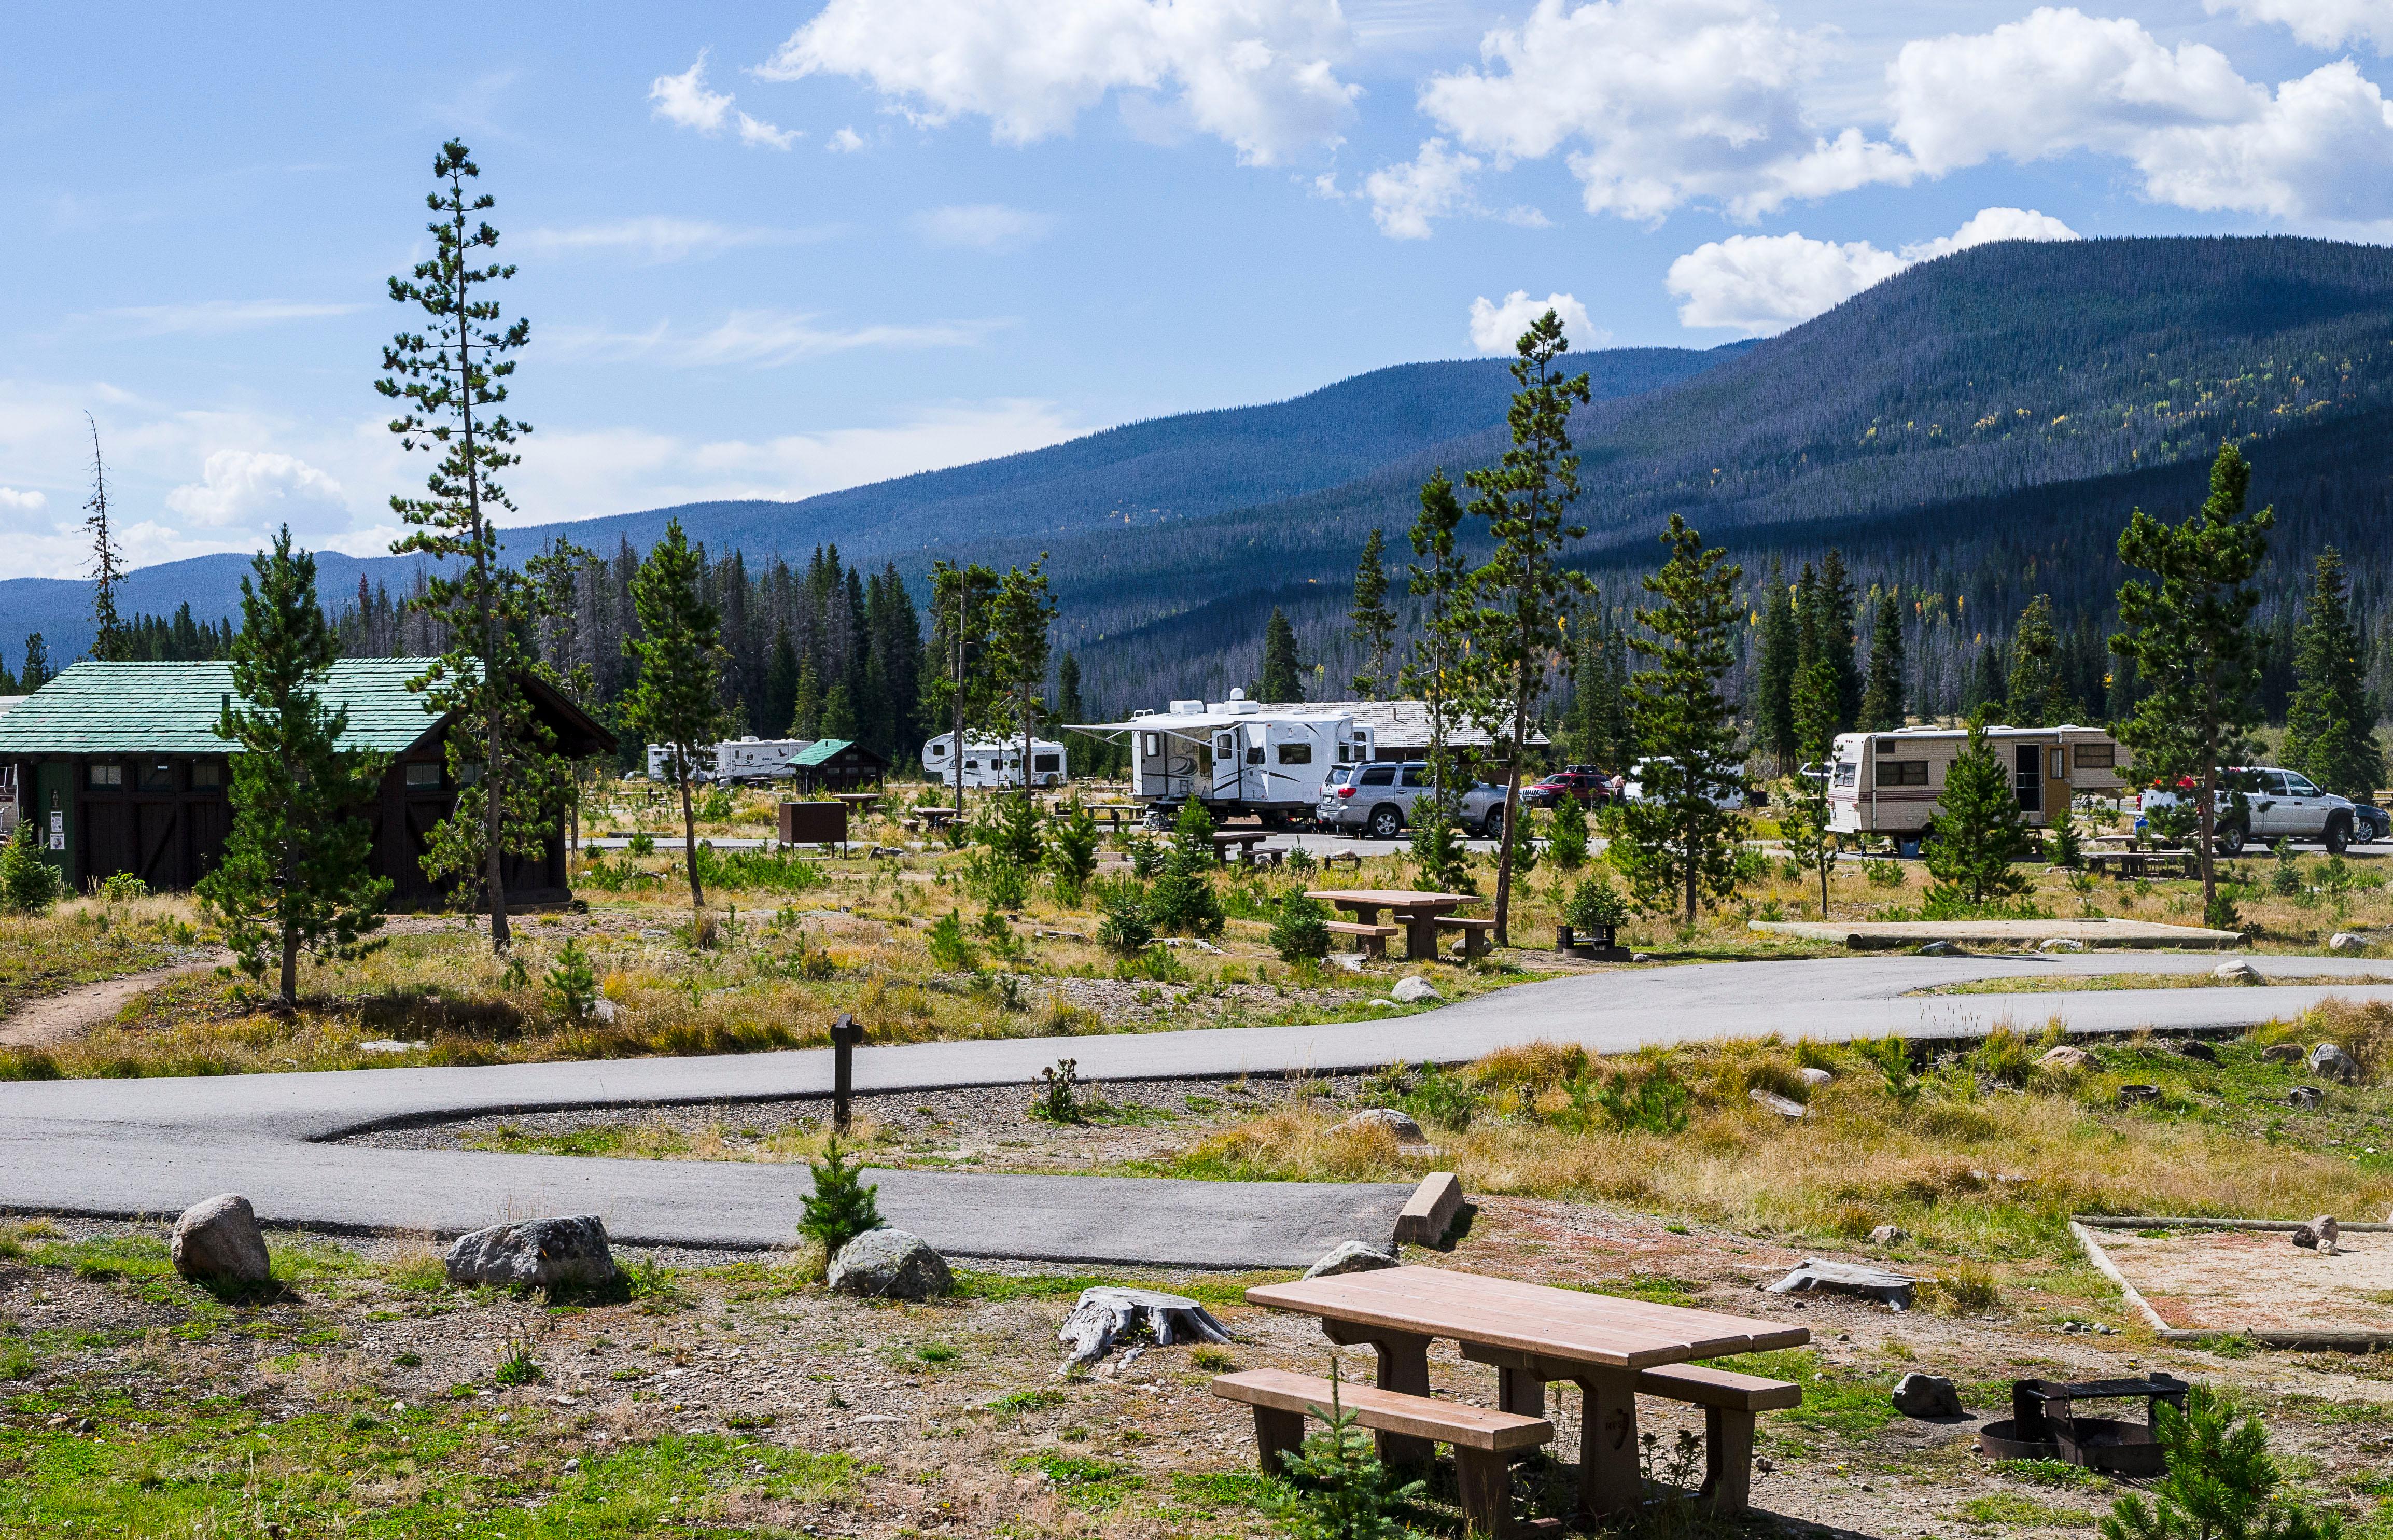 RVs and tents set up in Timber Creek Campground